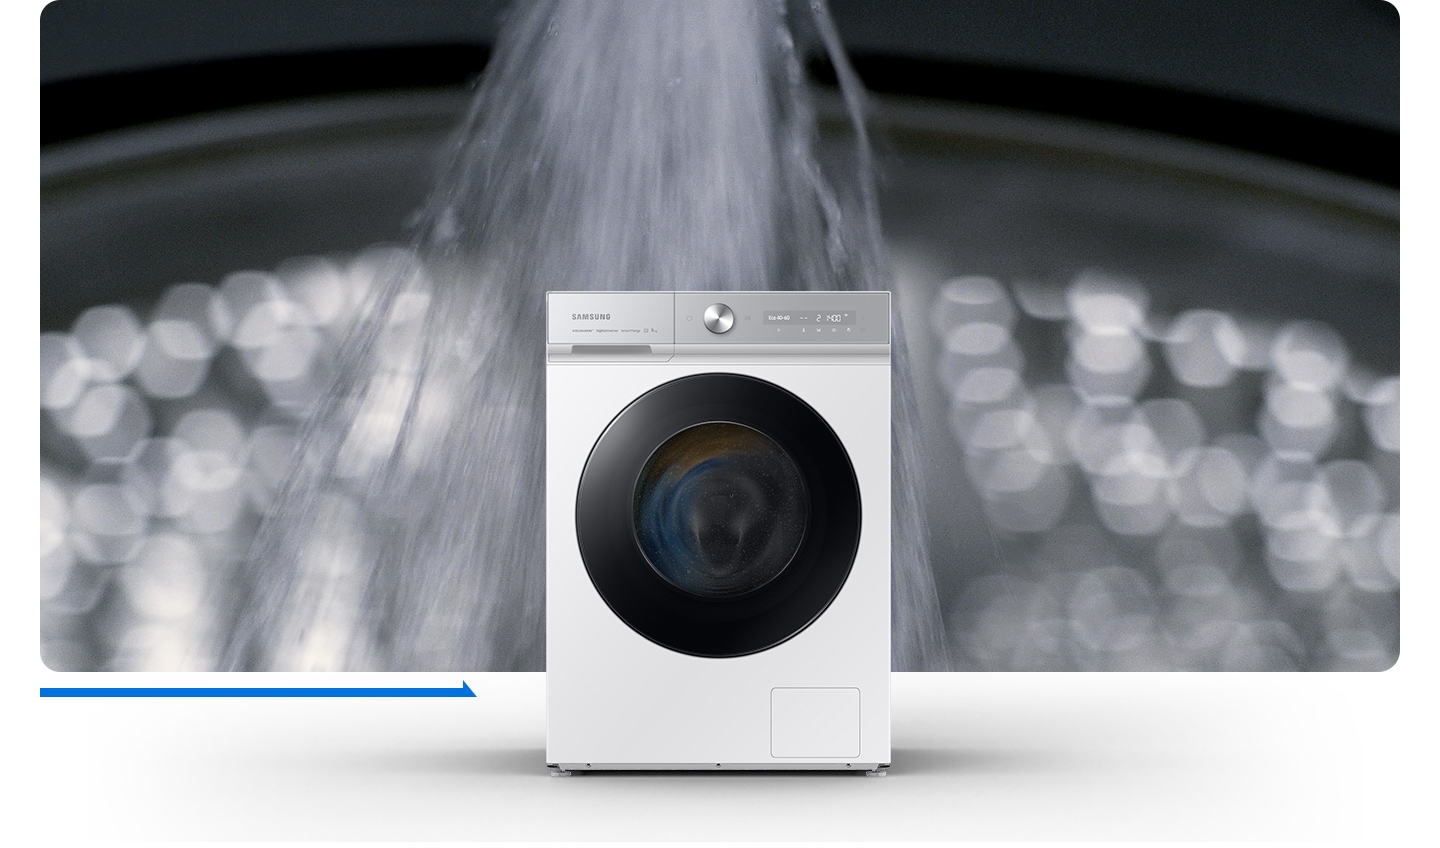 The powerful water is sprayed, bubbles are formed, and clothes are washed. The “50%" time saving” text appears on the top of the washing machine.